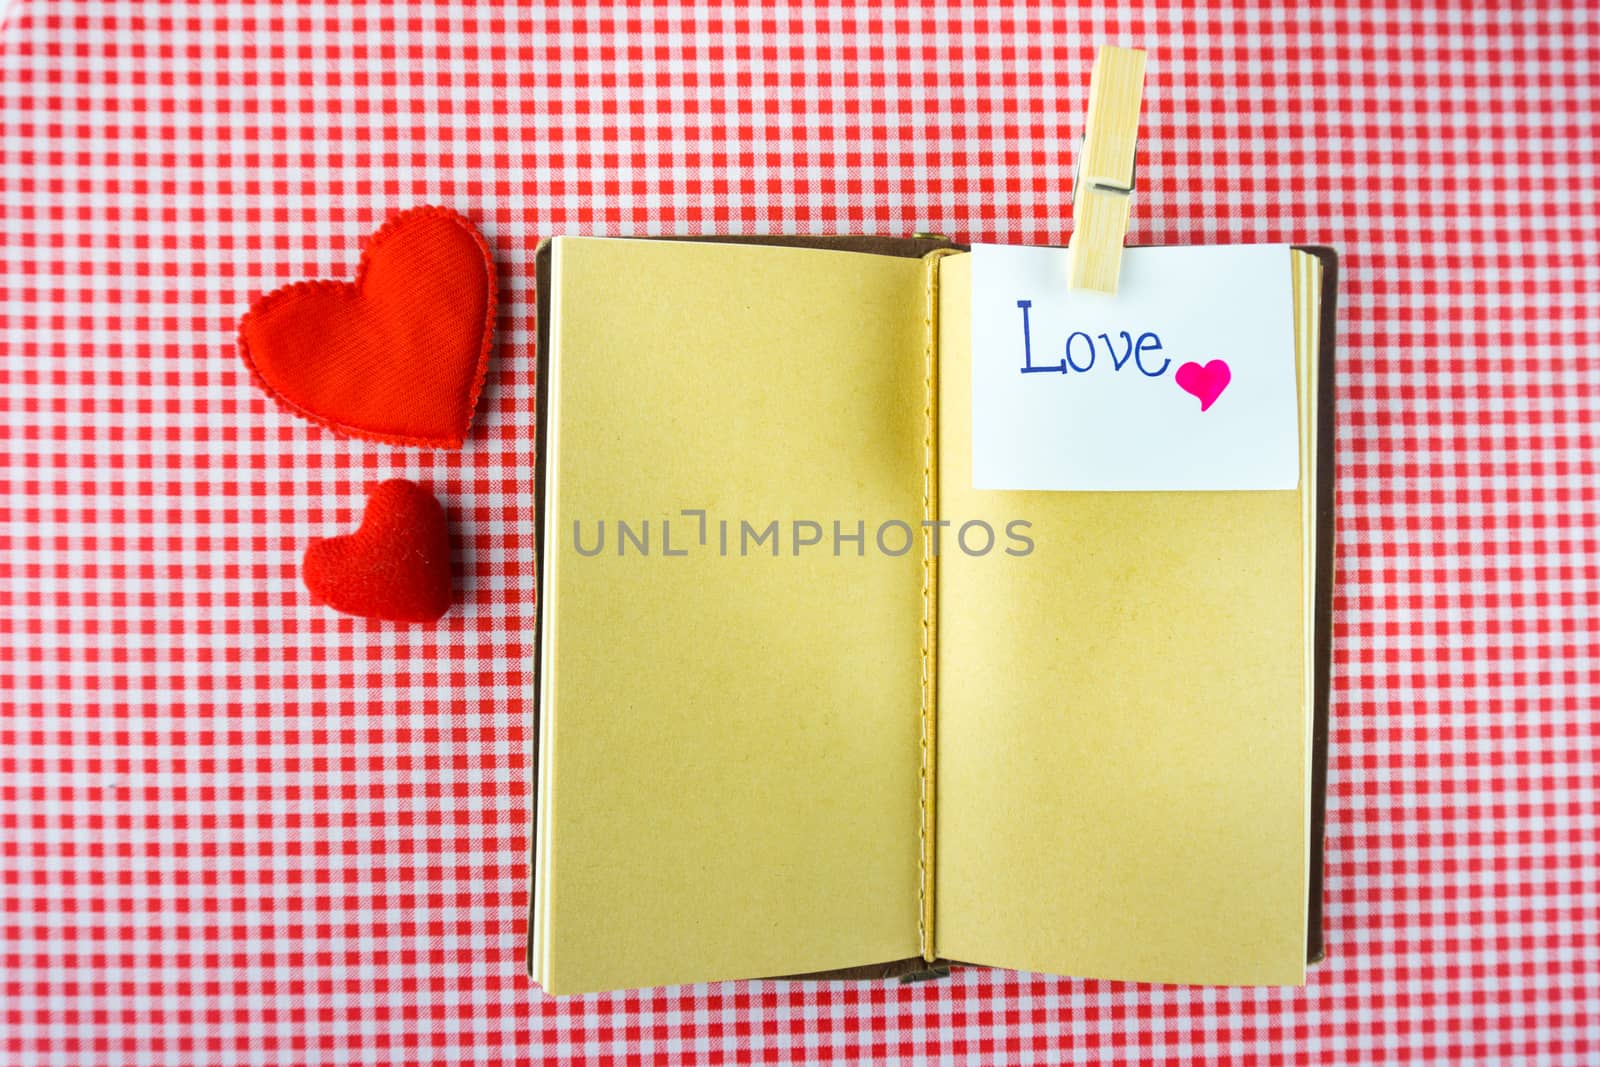 Valentines notebook with message card on red background Image of by nopparats